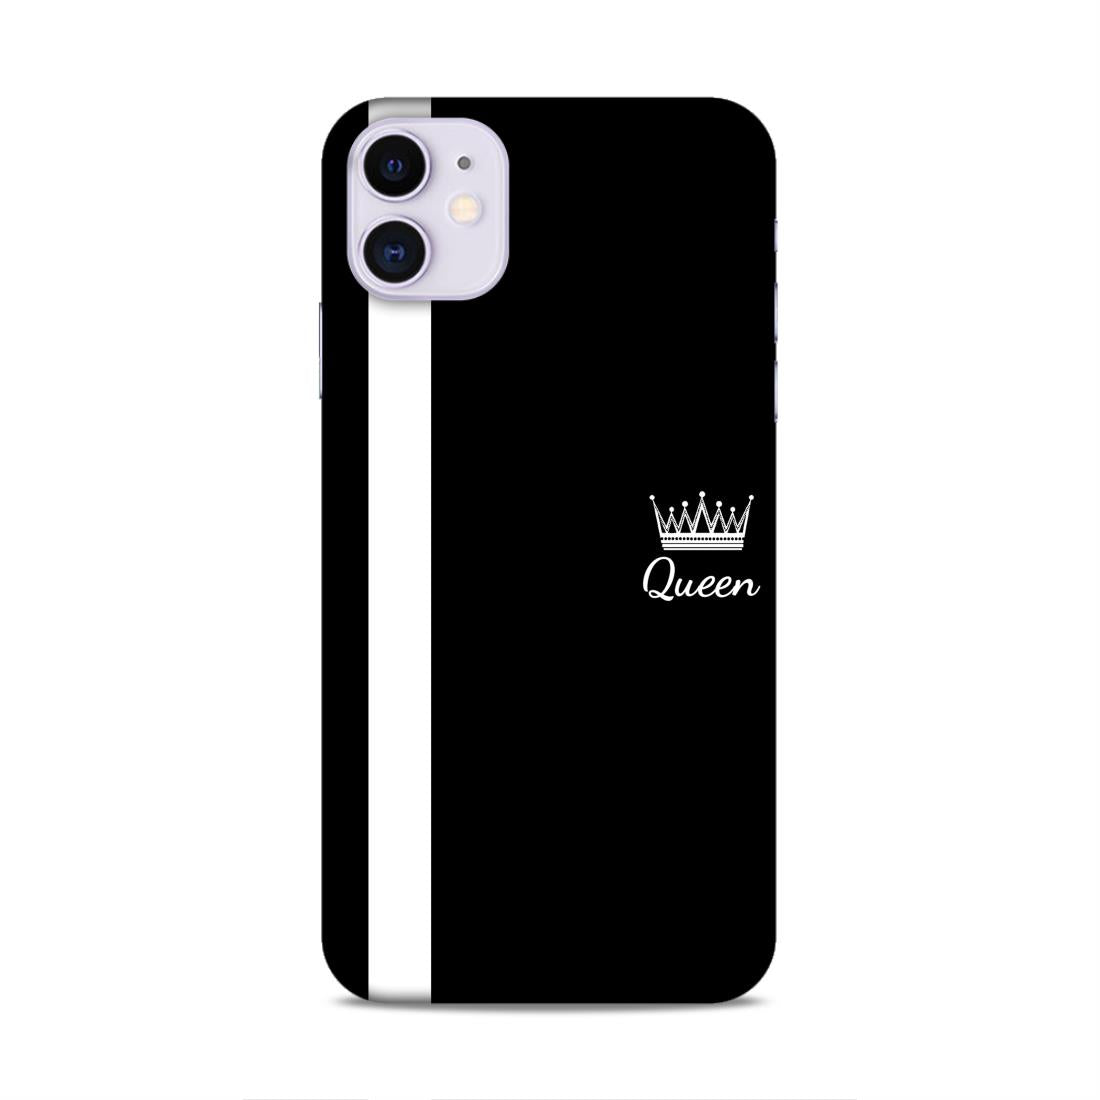 Queen Hard Back Case For Apple iPhone 11